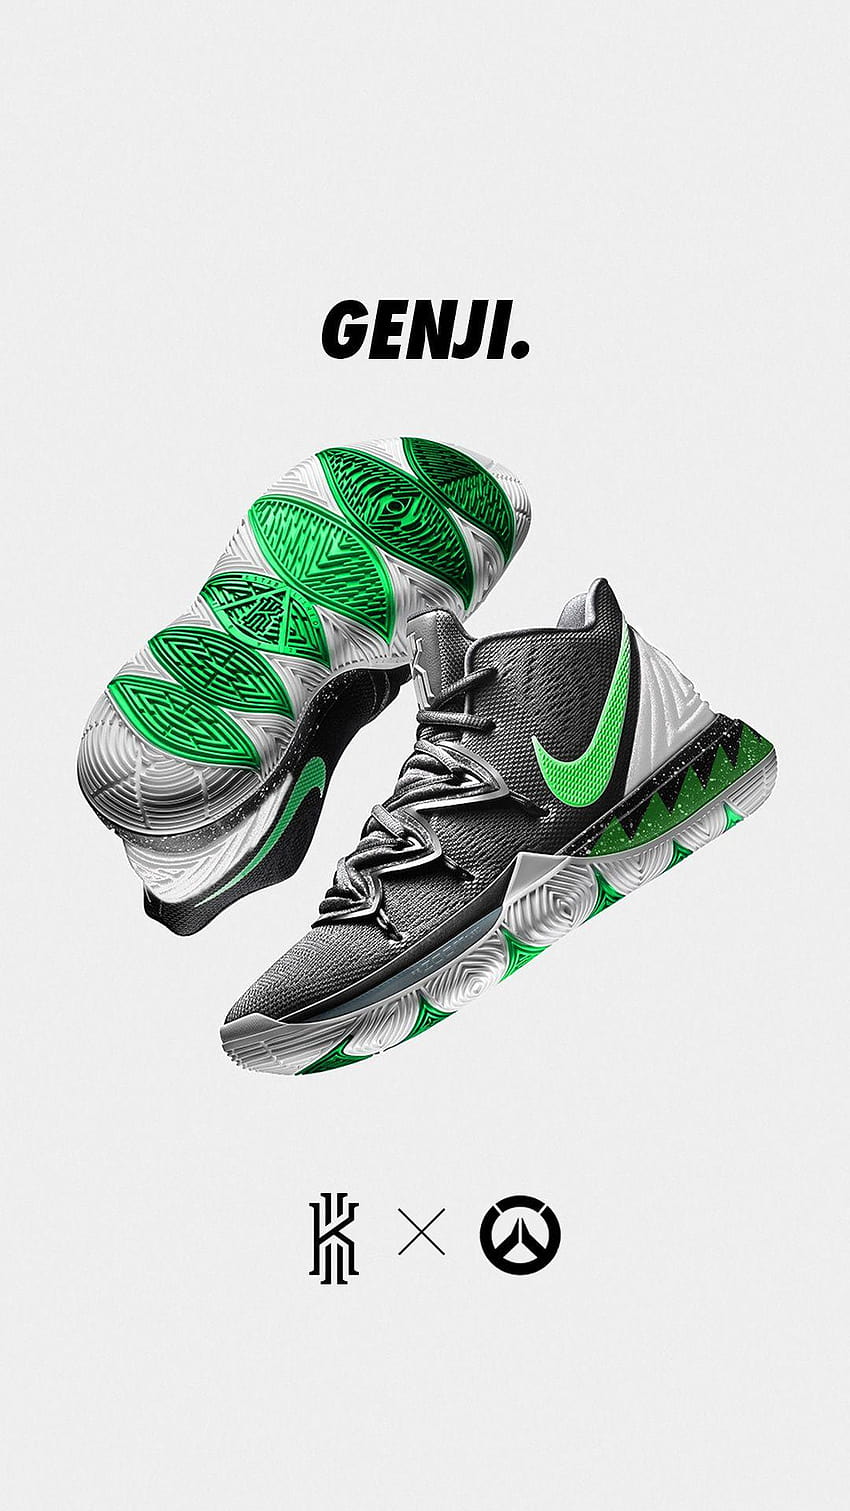 Nike Kyrie 5 X Overwatch Concepts on Behance, kyrie irving logo shoes HD phone wallpaper